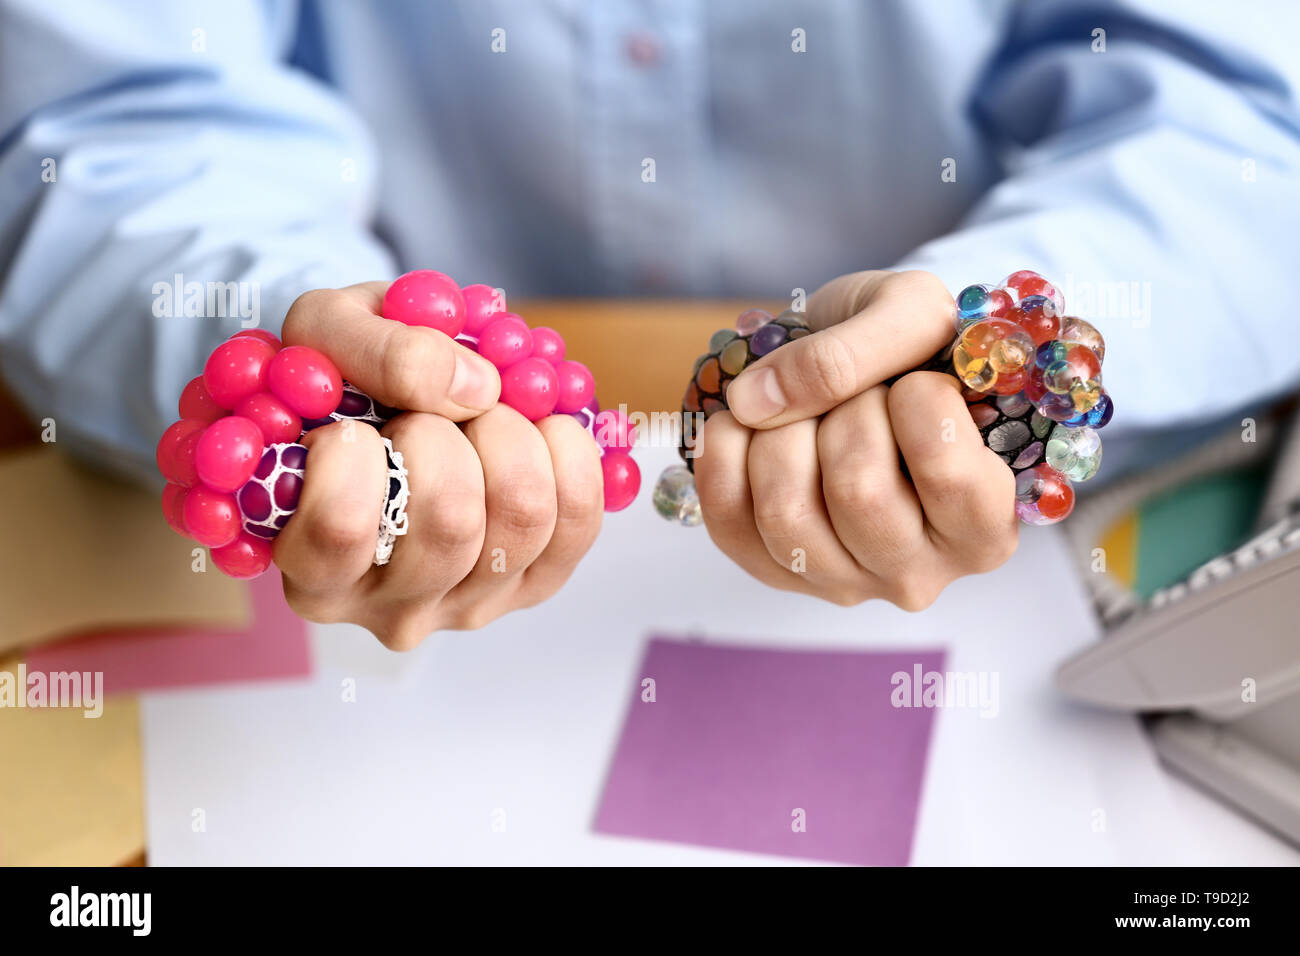 Woman squeezing stress balls in office, closeup Stock Photo - Alamy